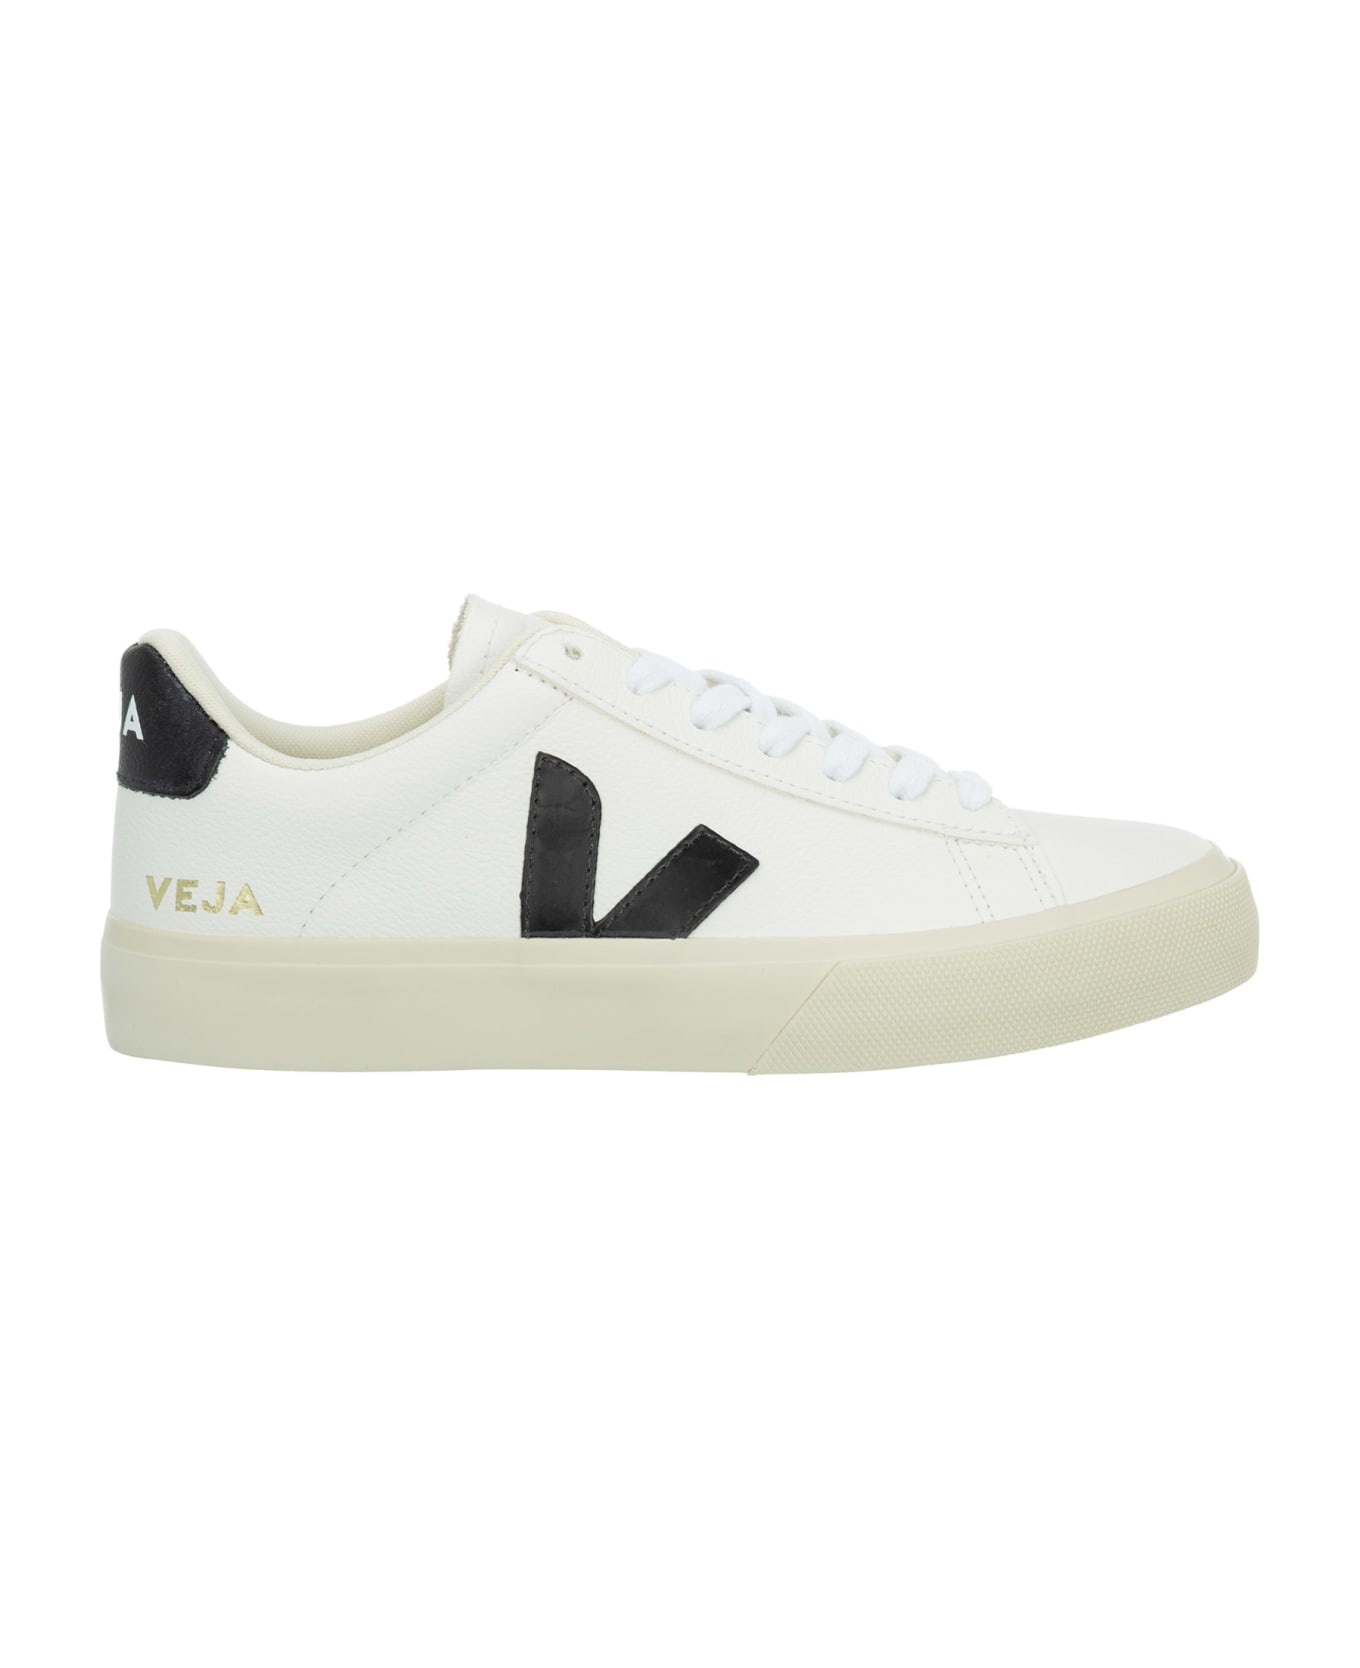 Veja Campo Leather Sneakers - White/black スニーカー